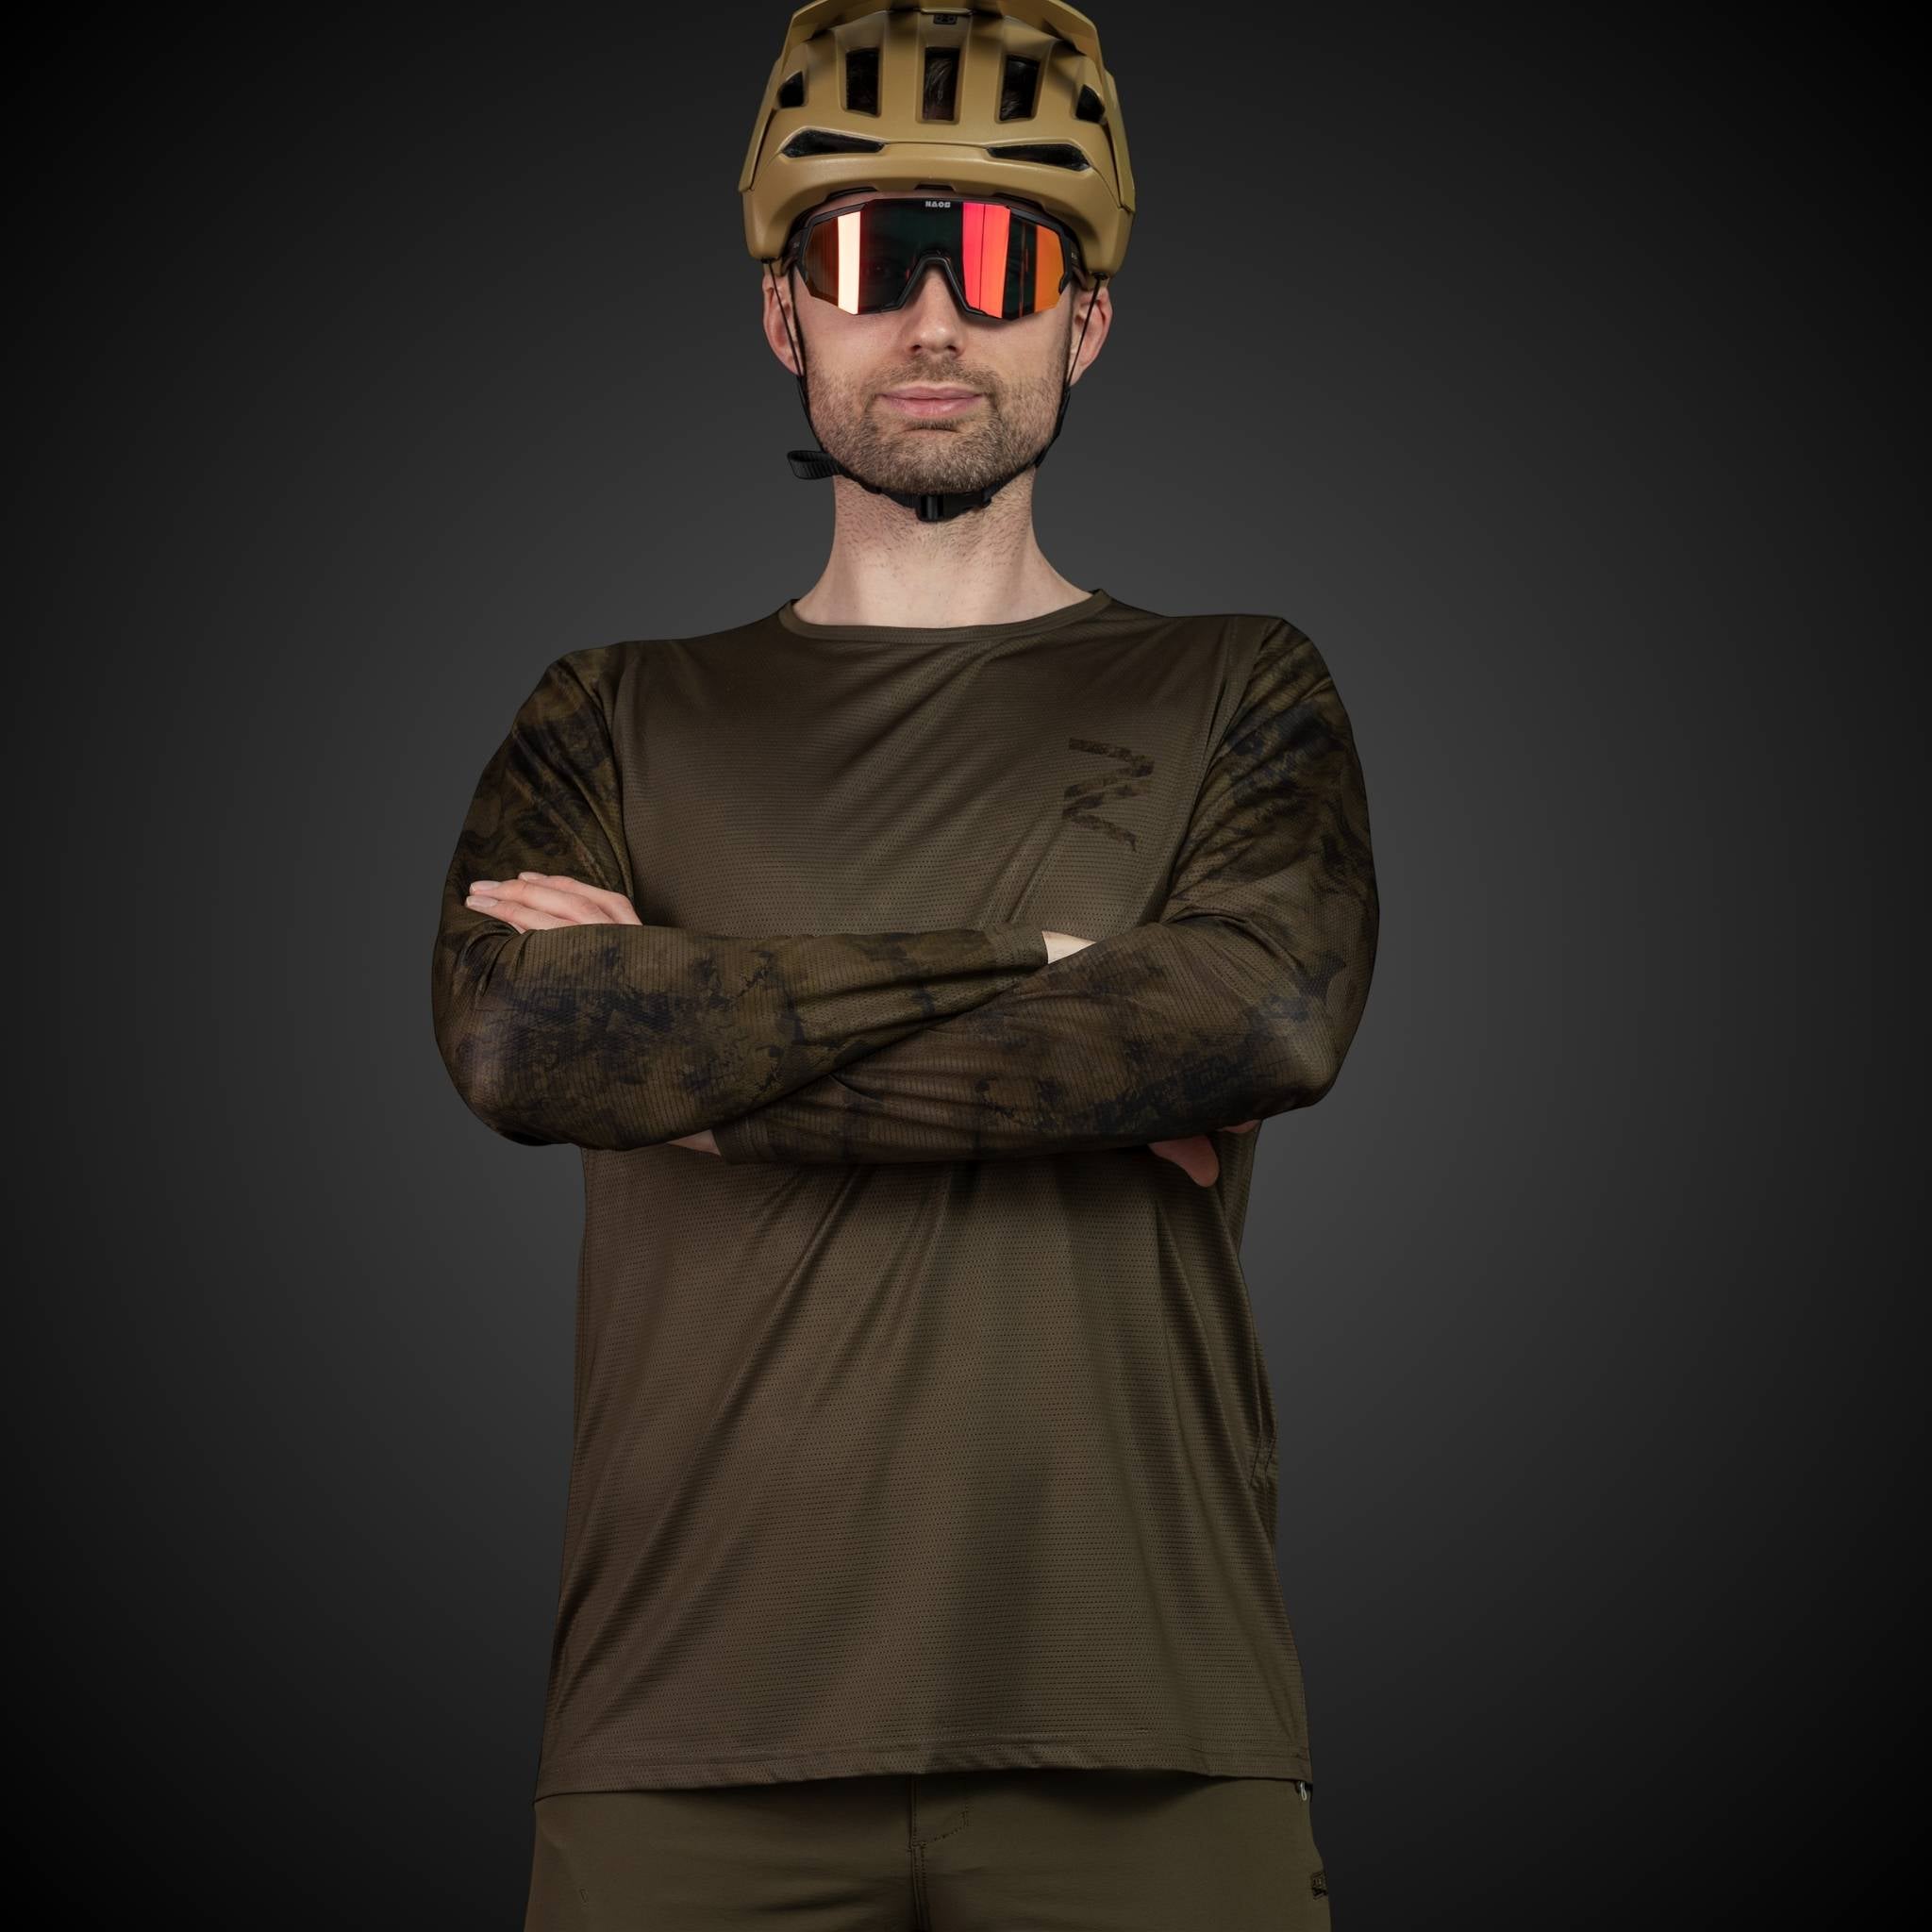 Outdoor-ready long sleeve mountain bike jersey in a stylish khaki hue, crafted with sustainable materials for enhanced stretch and endurance on downhill trails